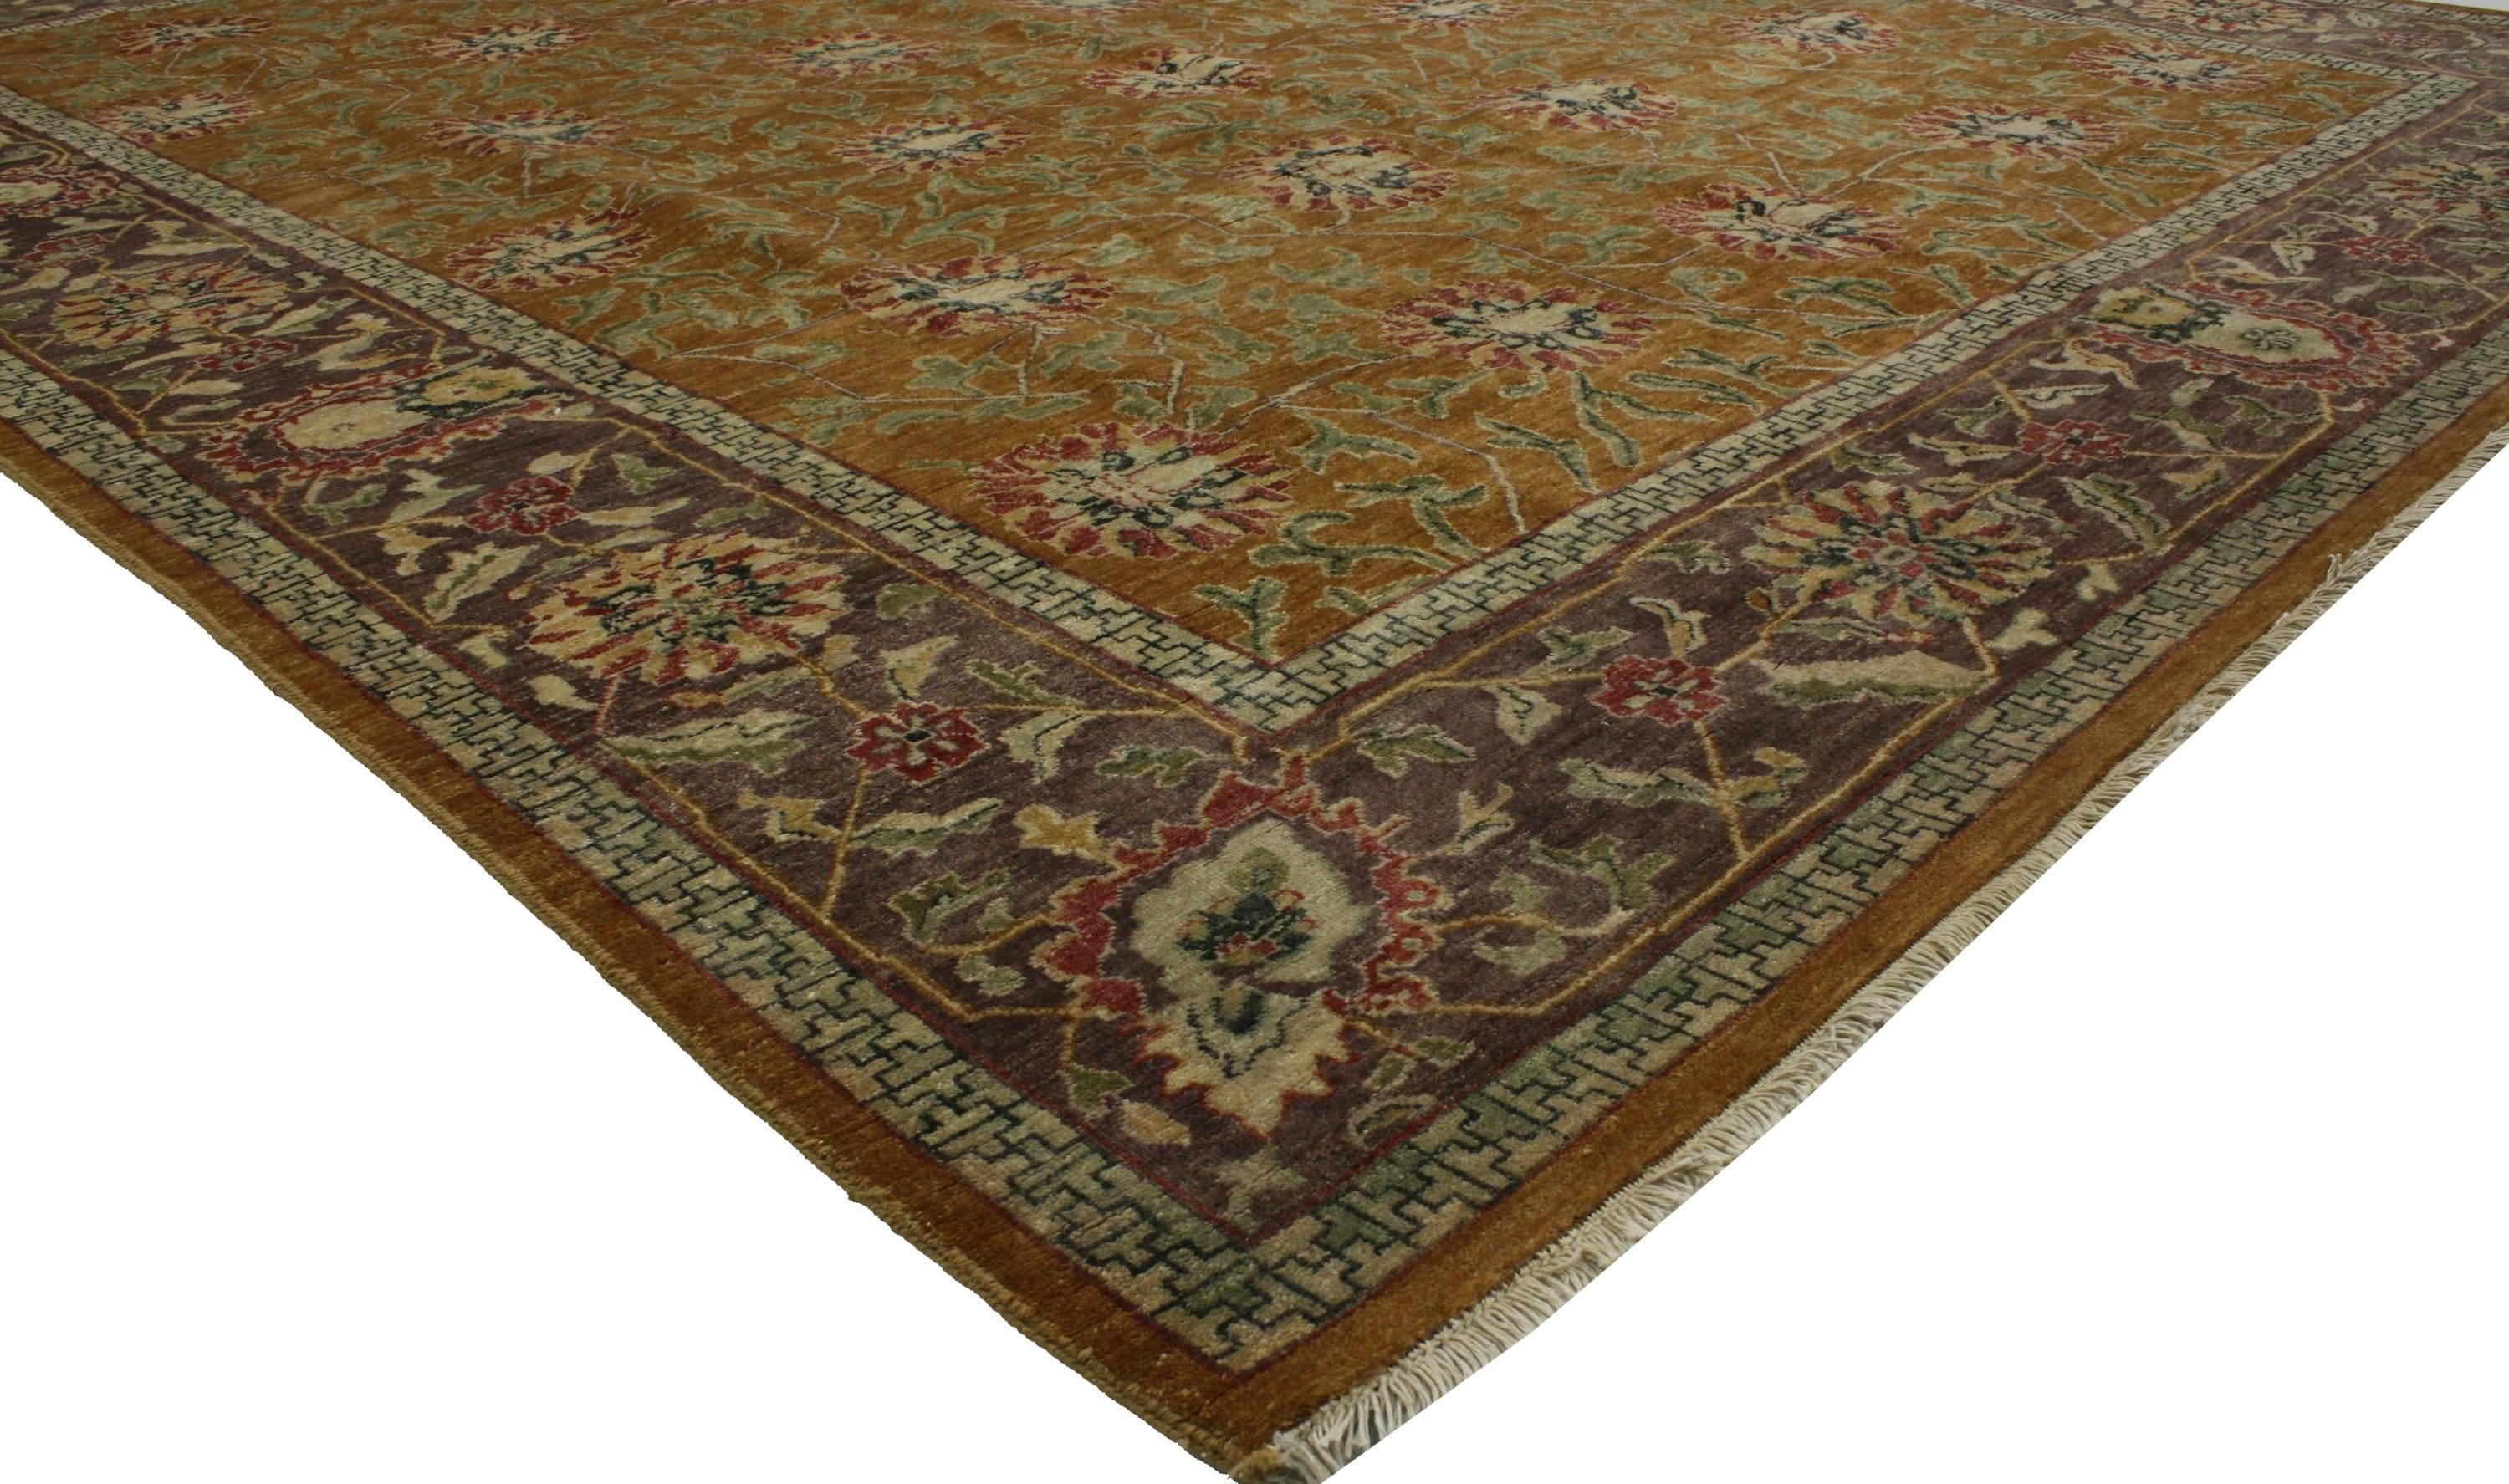 Modern New Contemporary Indian Area Rug with Rustic Arts and Crafts Style